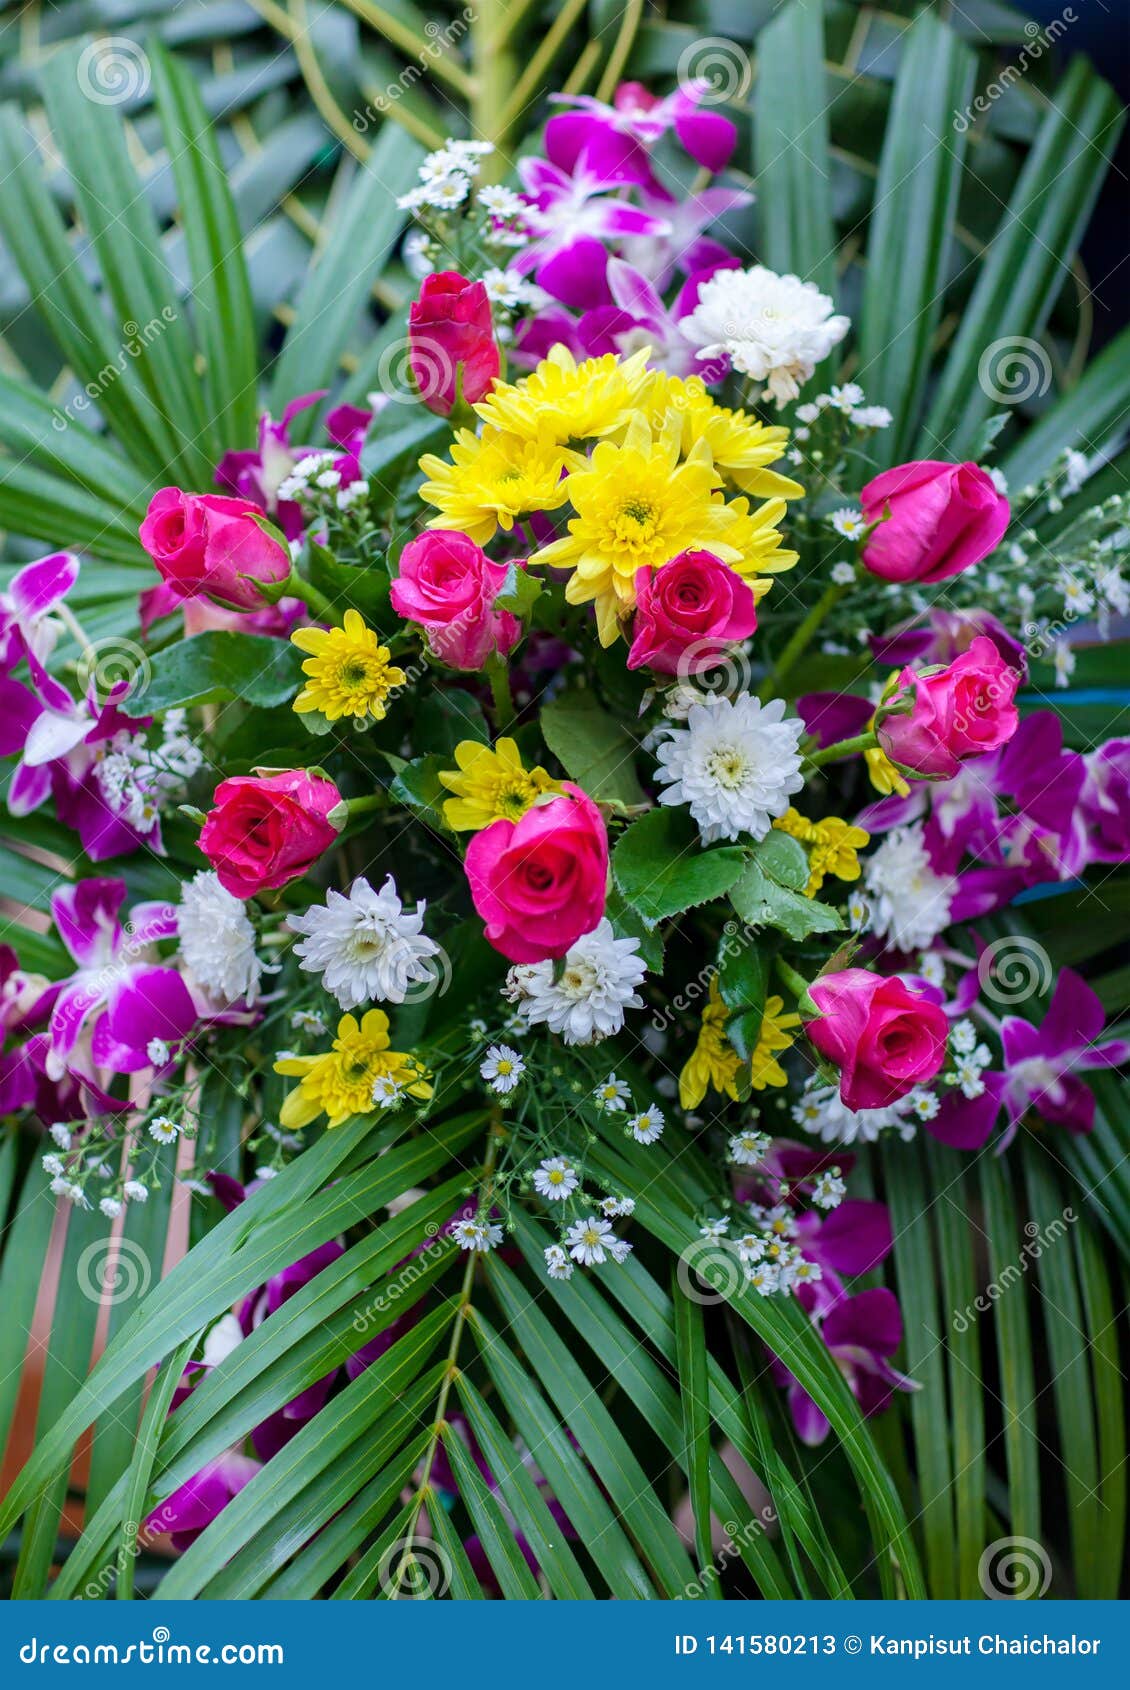 Beautiful Flowers Background For Wedding Scene Beautiful Bouquet Of Mixed Flowers In A Vase On Wooden Table Stock Image Image Of Blooming Vase 141580213